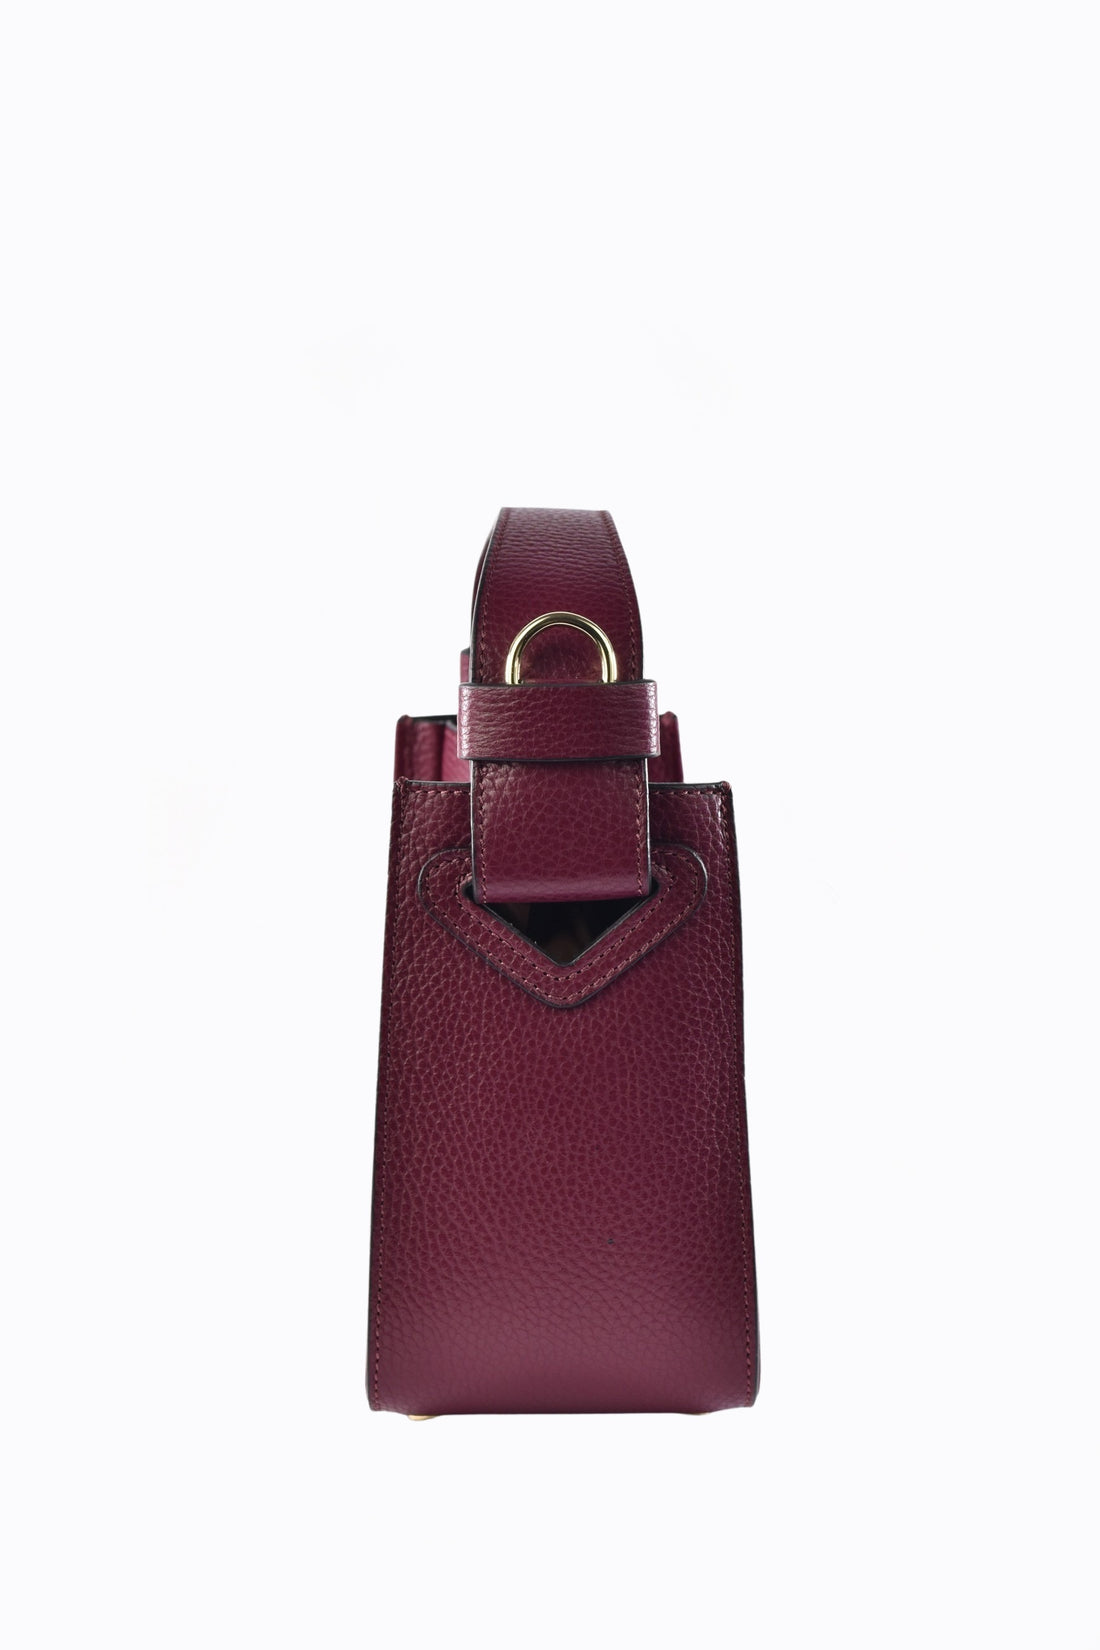 Kendall bag in Plum Dollar leather